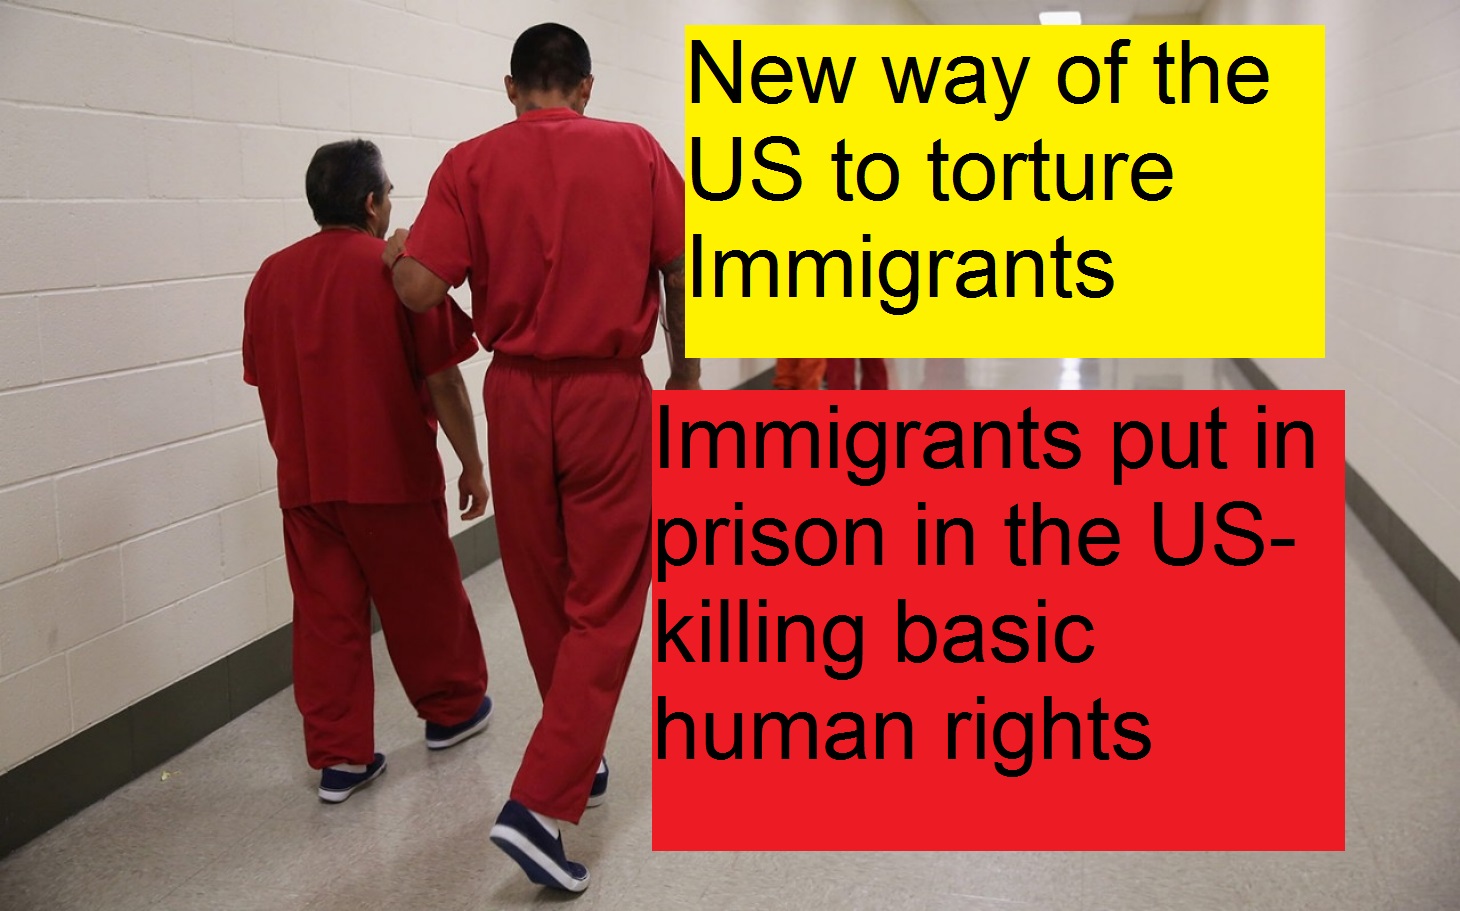 Immigrants put in prison in the US-killing basic human rights